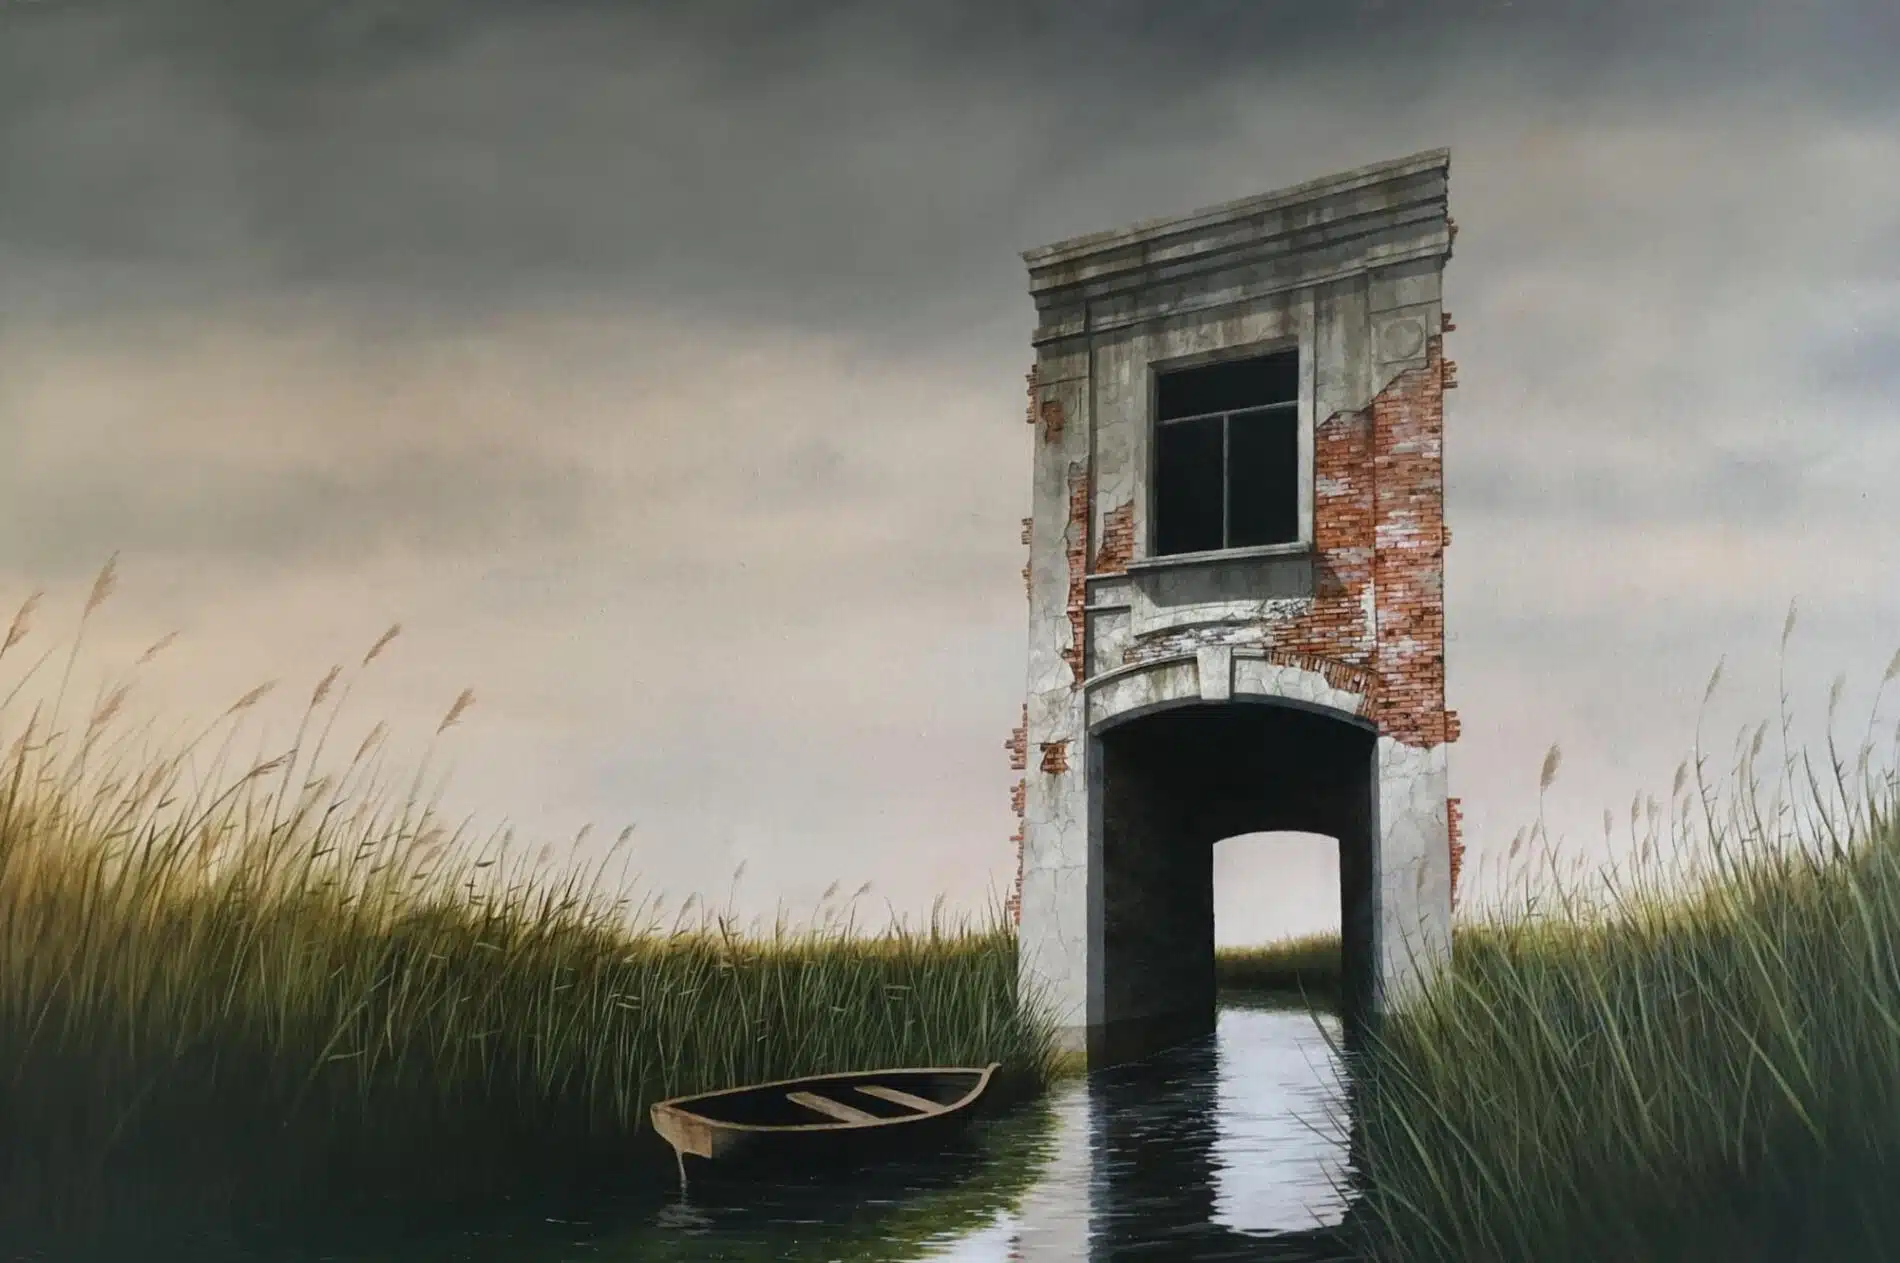 Lee Madgwick fragments